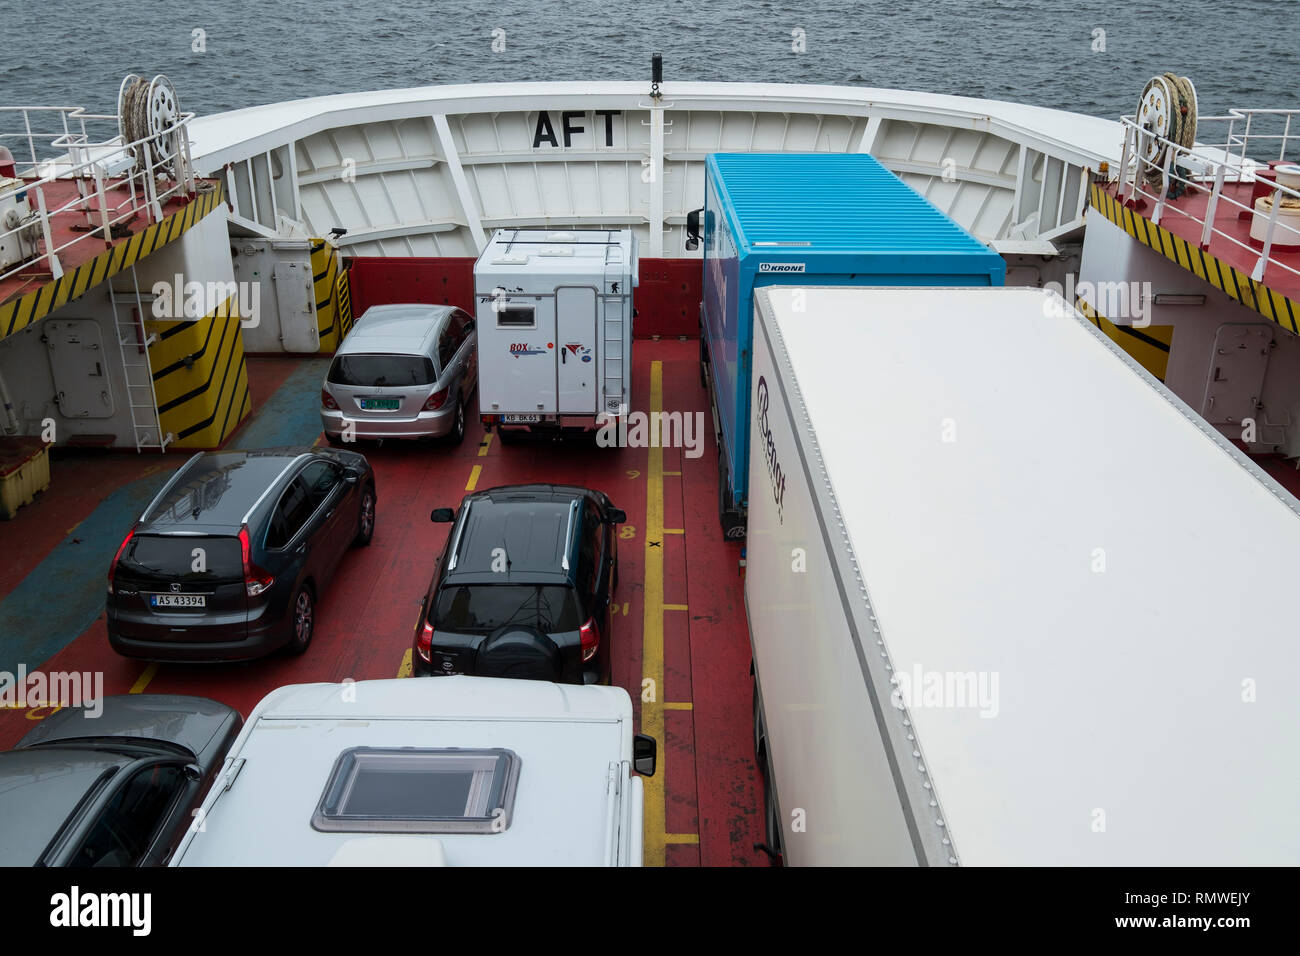 The vehicle deck of the ferry that runs between Moss and Horten in Norway. Stock Photo